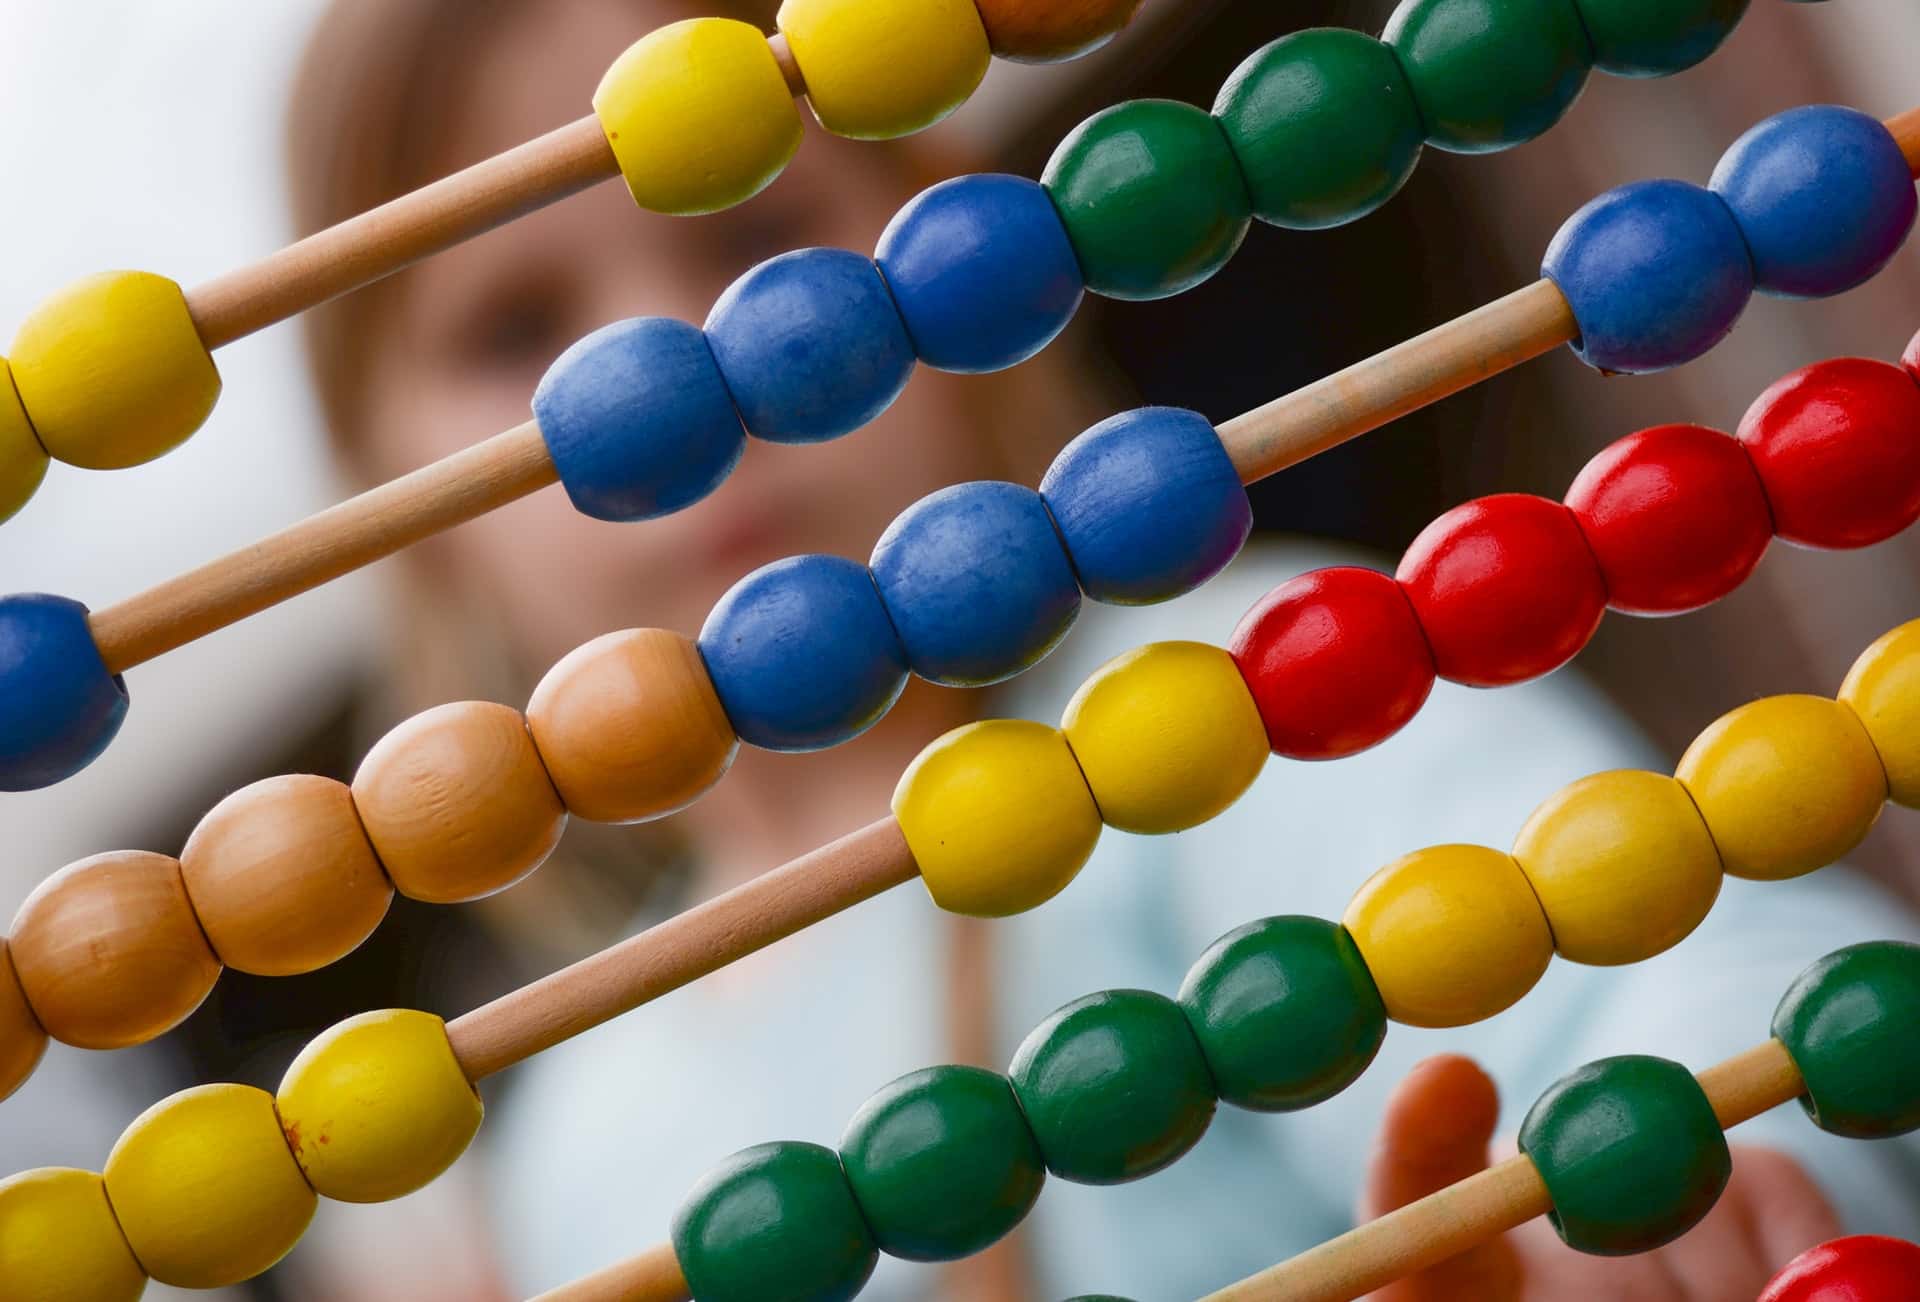 A person using a colorful abacus